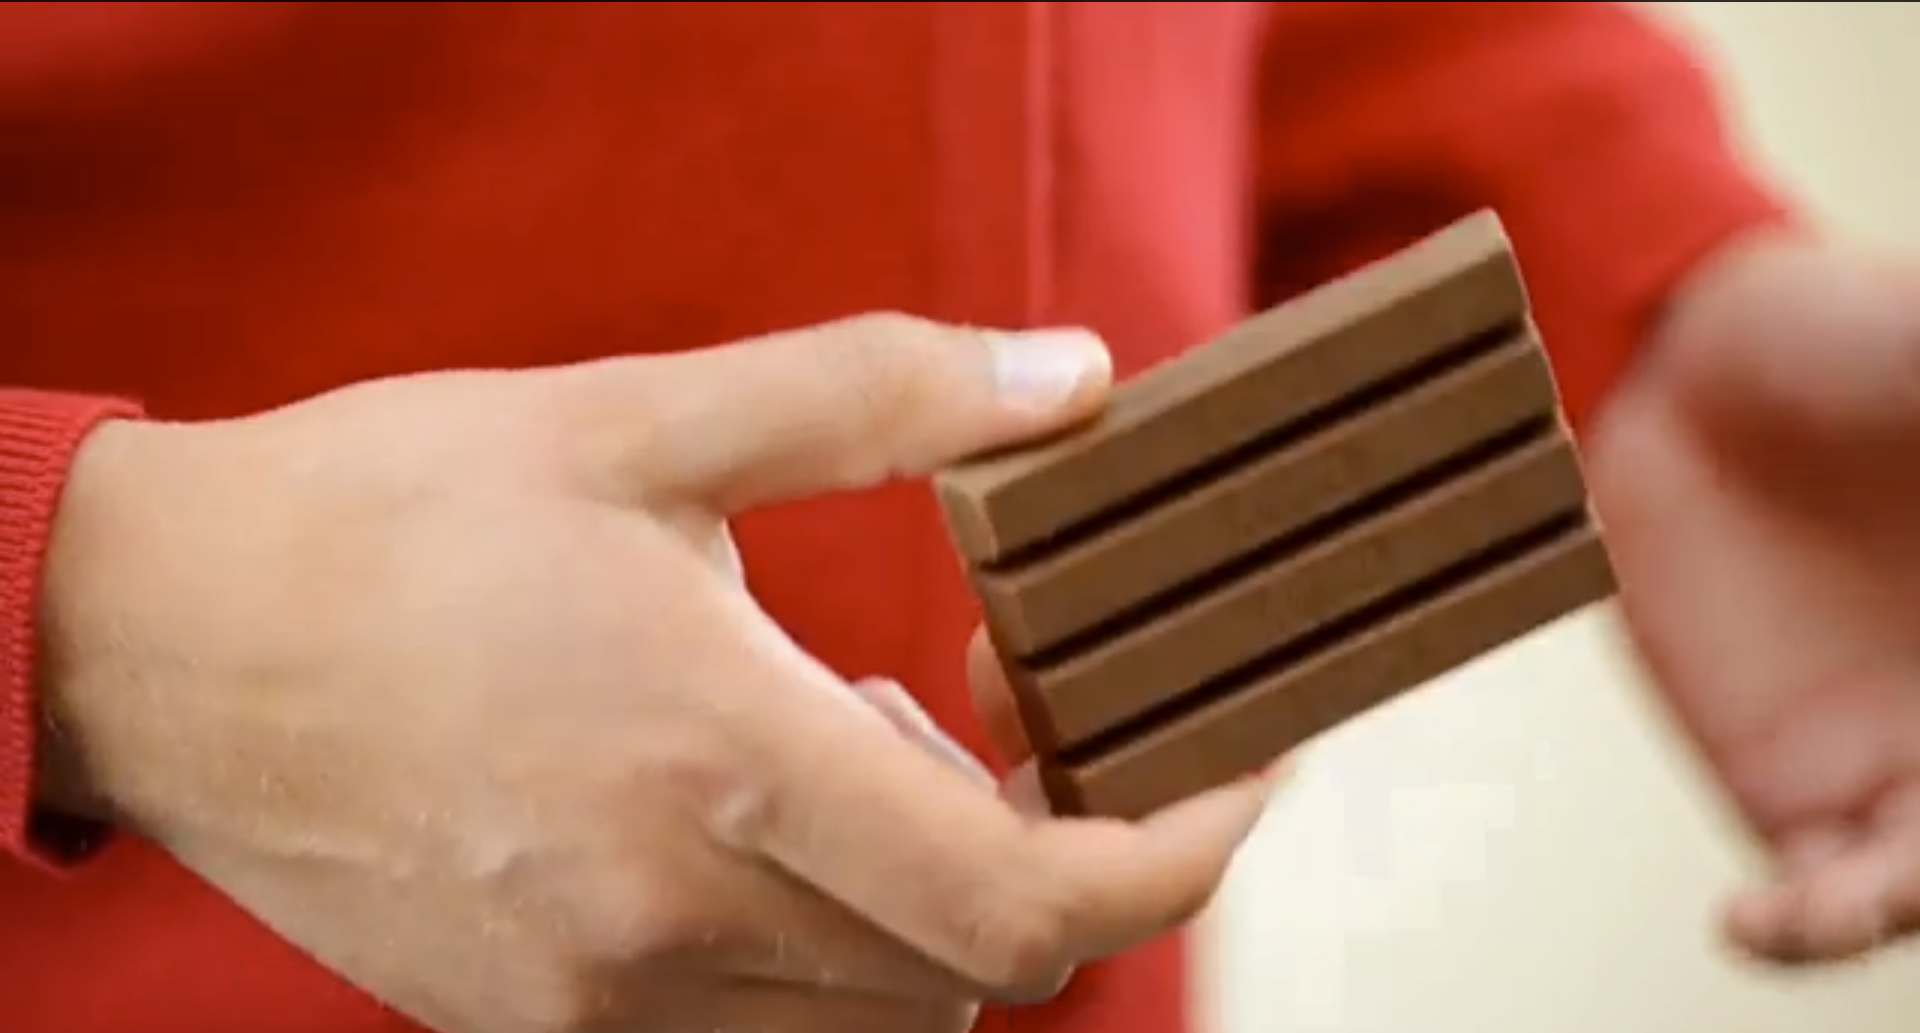 nestle spoofs apple in kitkat 4 4 confectionery advertisement image 1